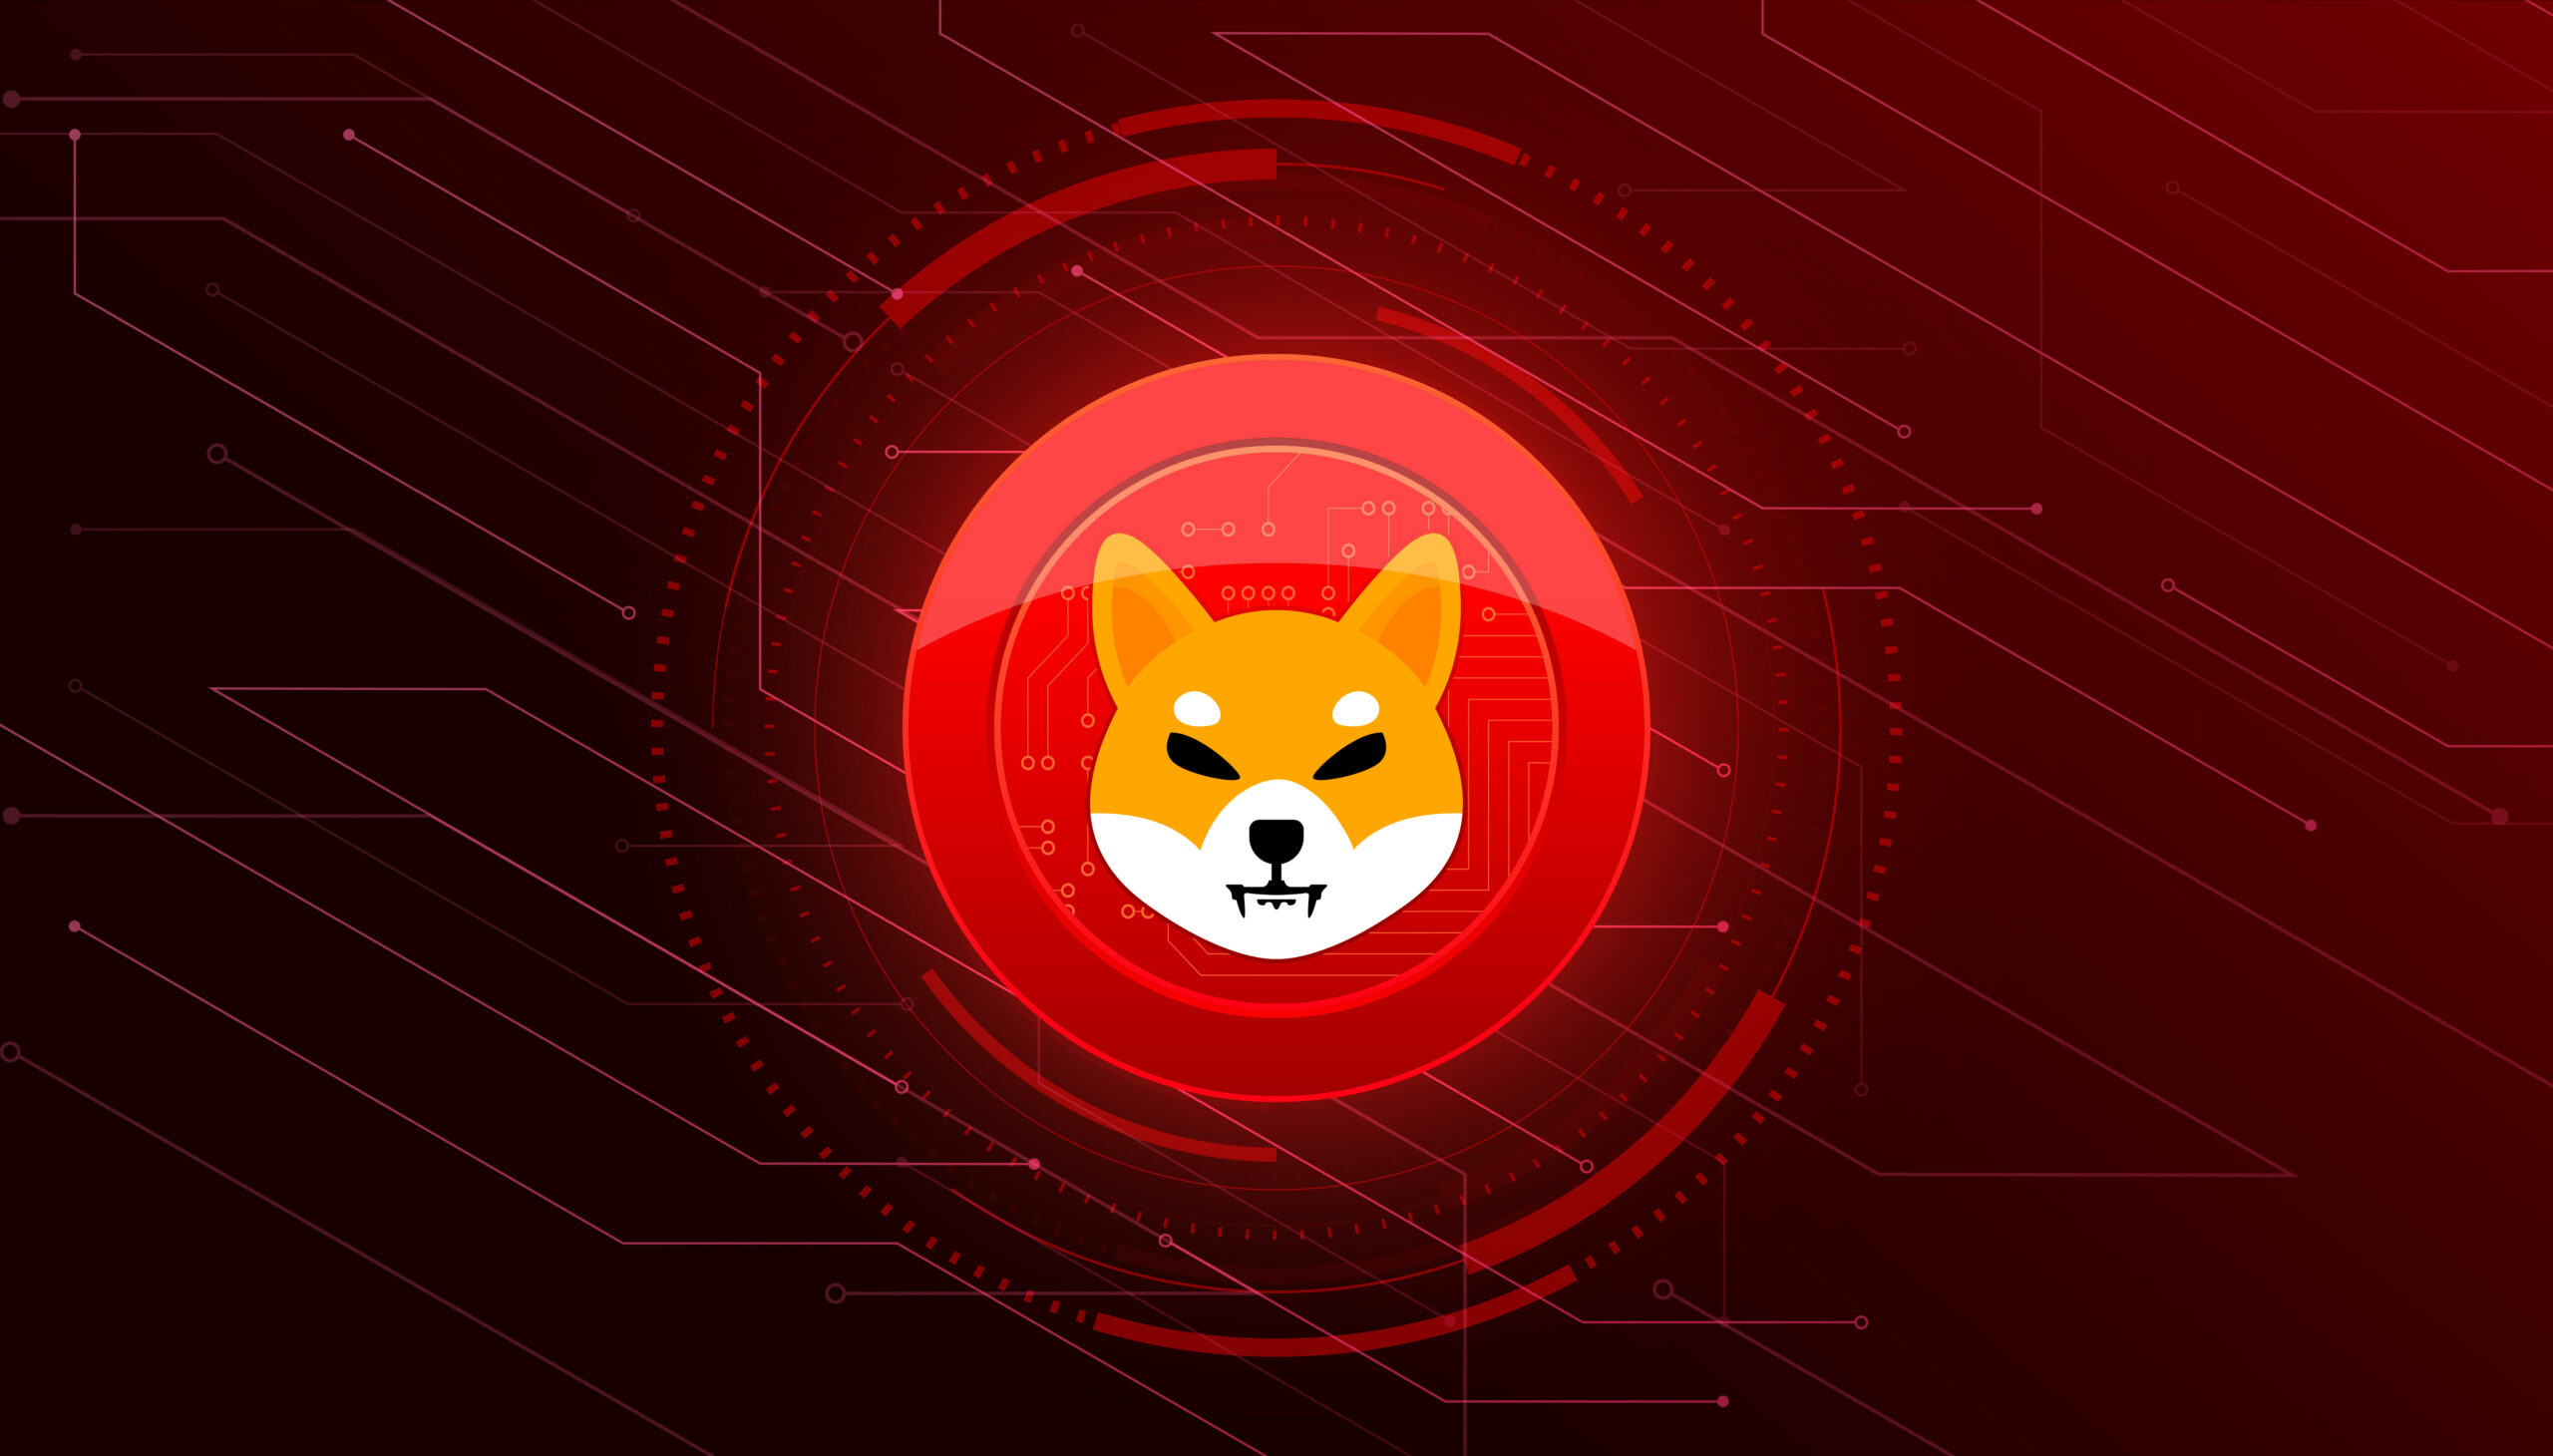 Shibarium Transactions Spike 288%, But Why Is Shiba Inu Price Down Today?